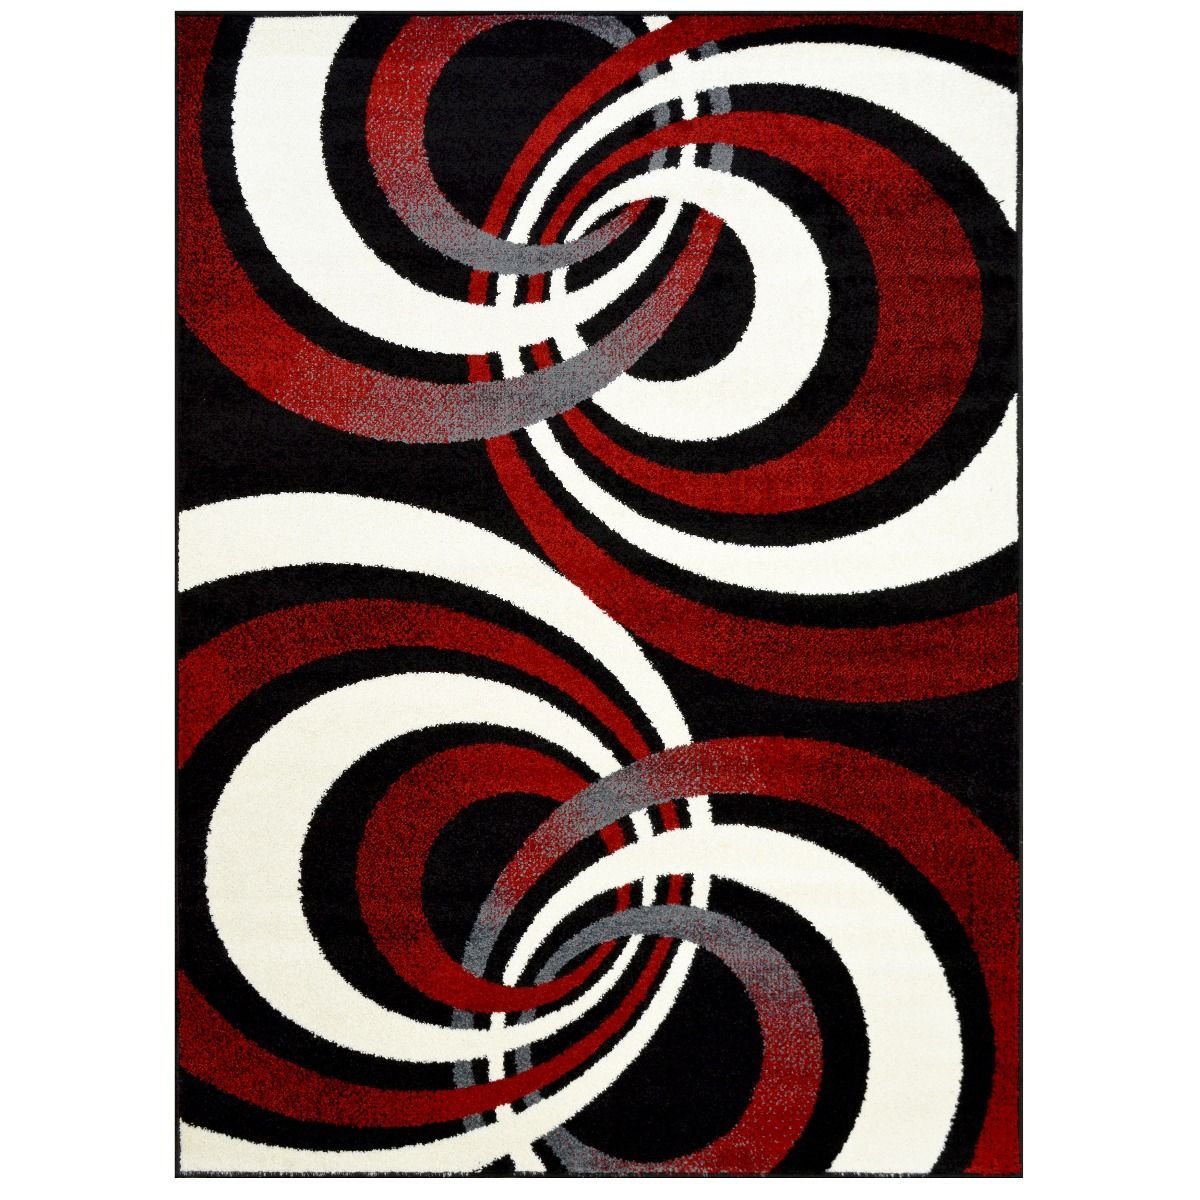 Spiral Distressed Rugs #87